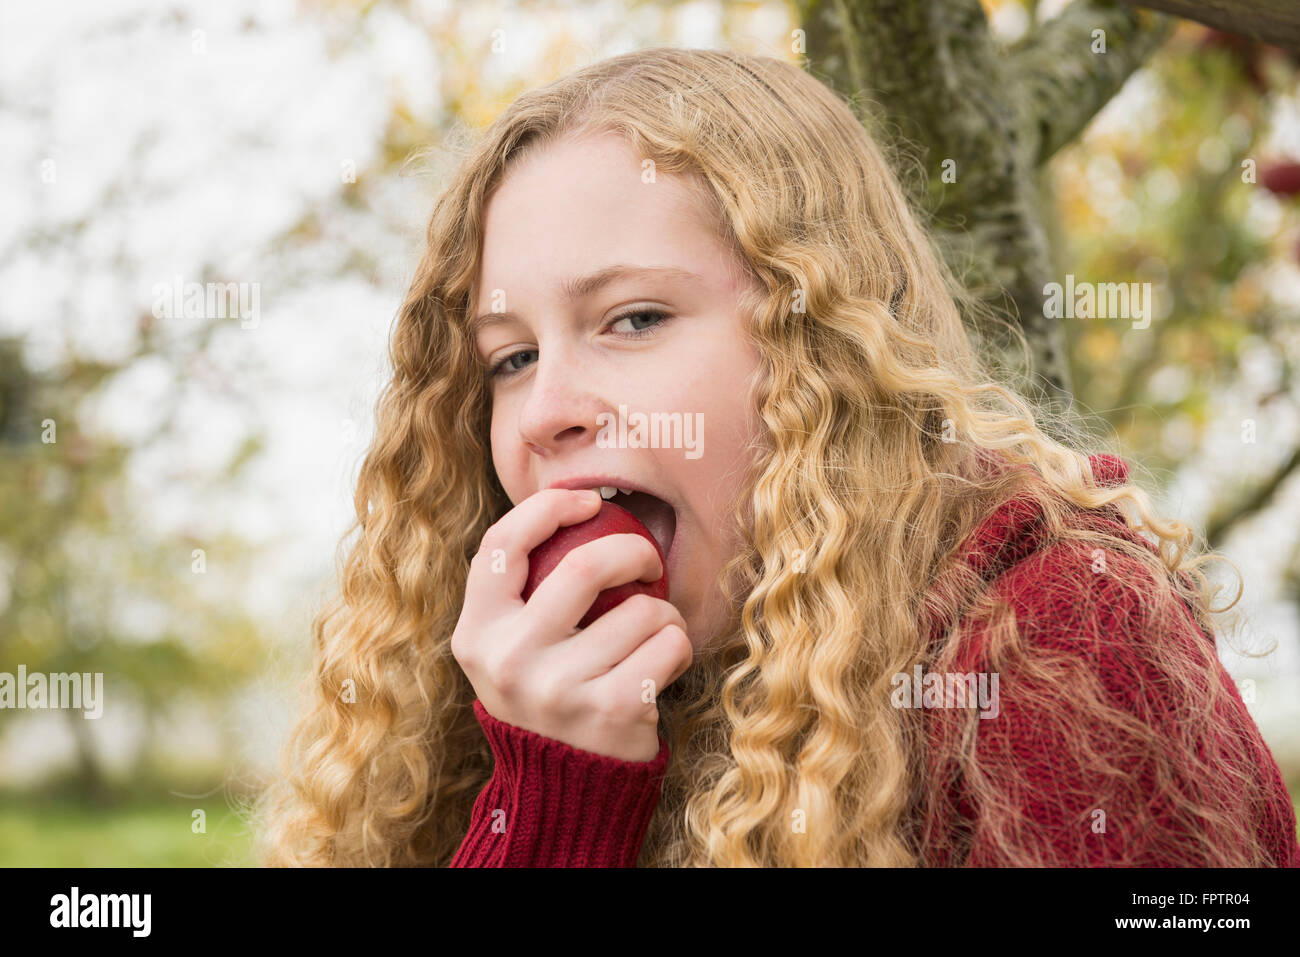 Portrait of a blond teenage girl biting into an apple in apple orchard, Bavaria, Germany Stock Photo